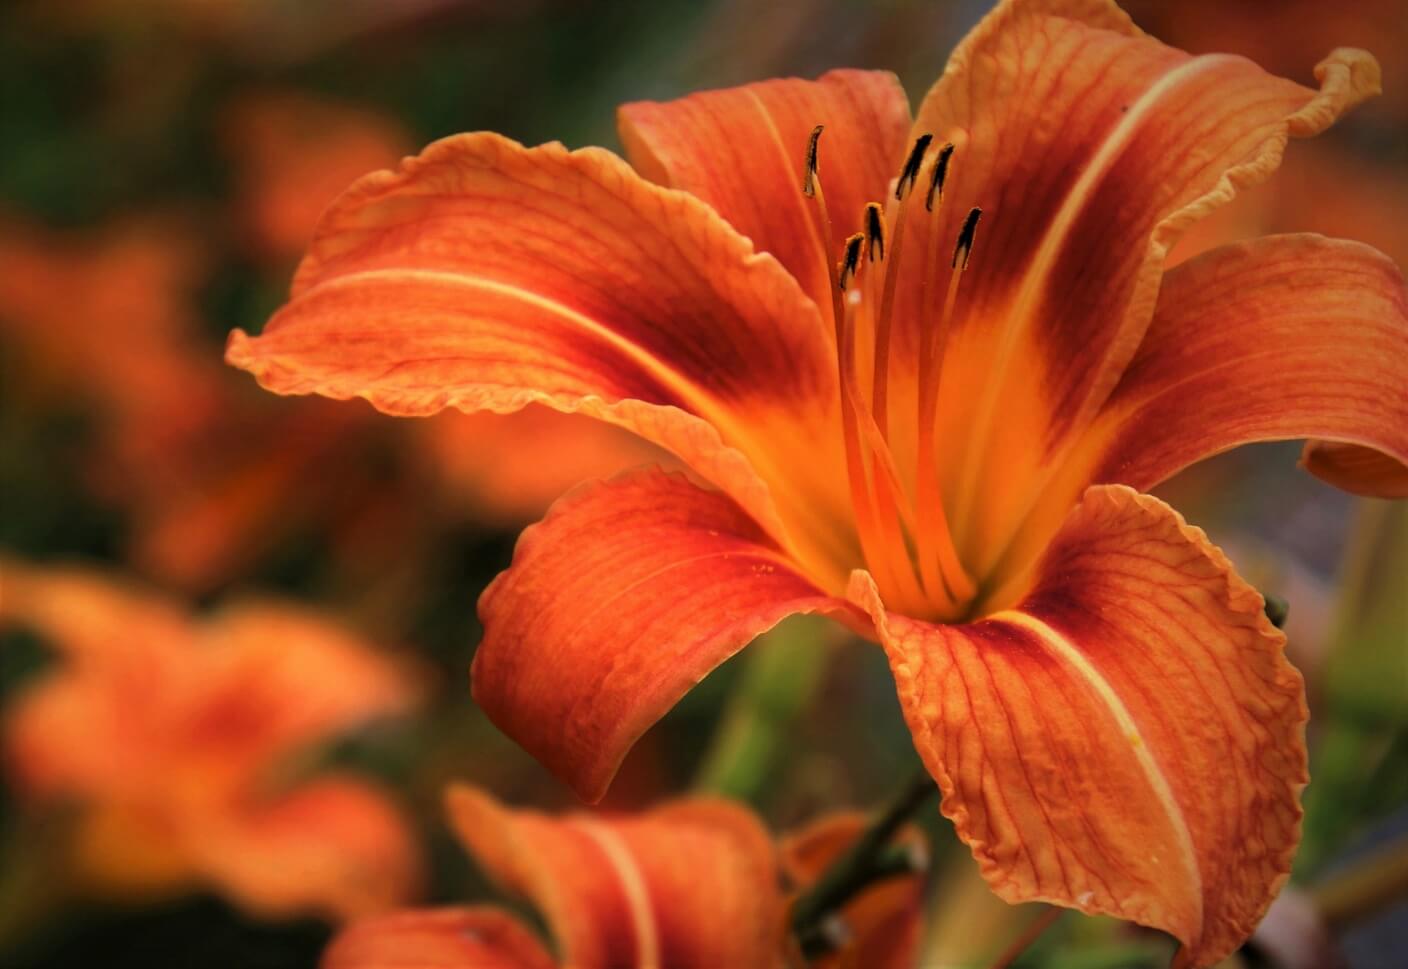 Differences between lilies and daylilies